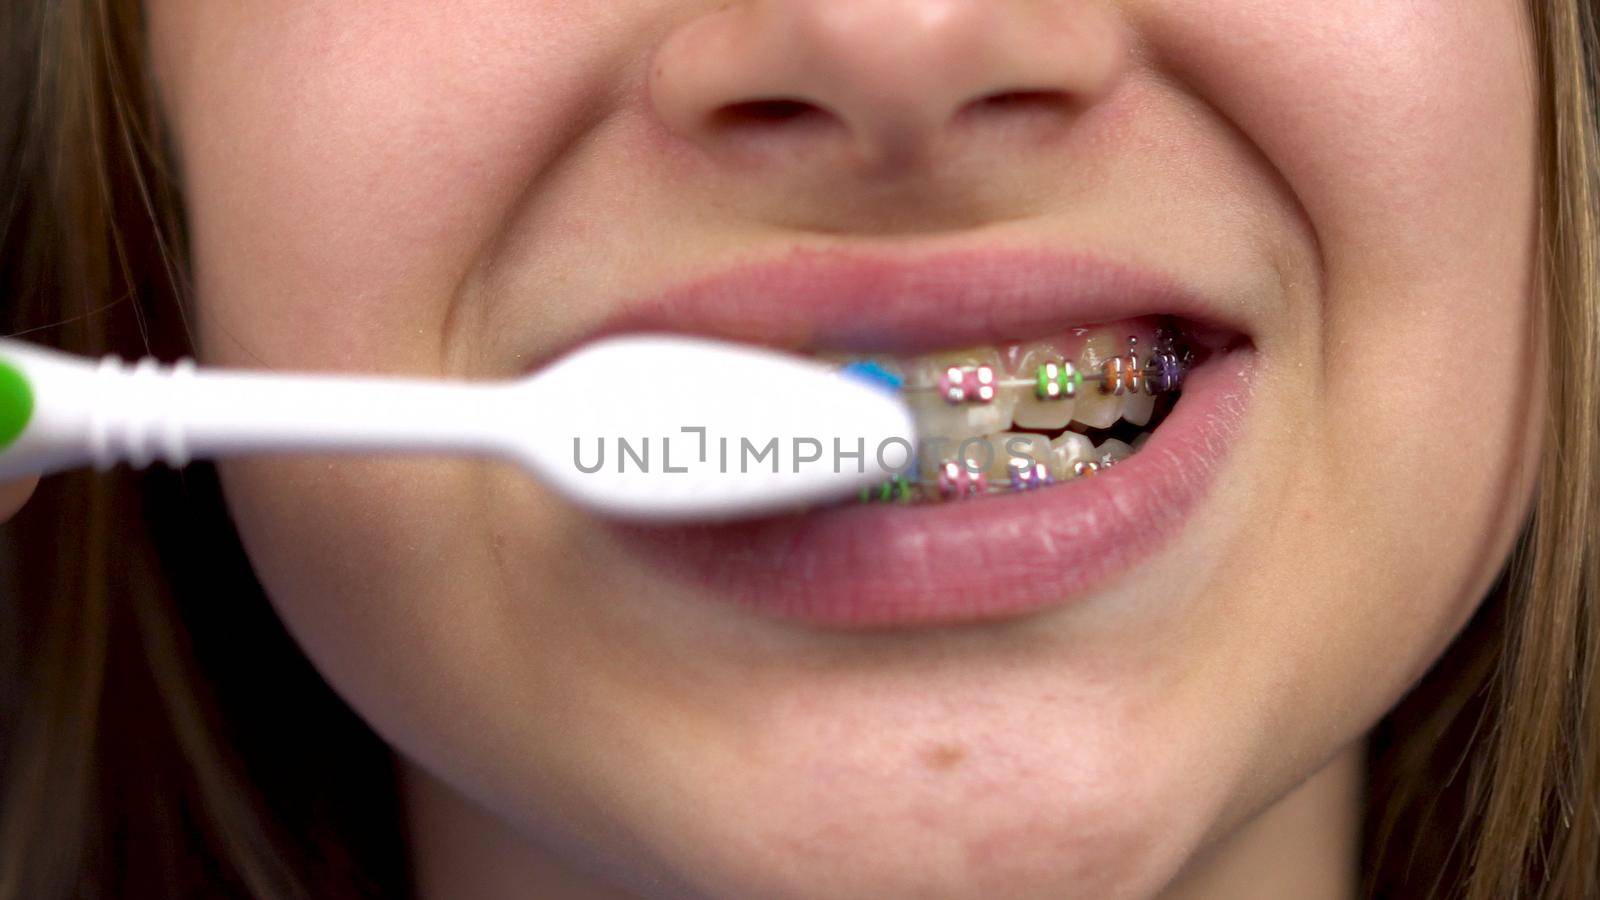 Girl with braces brush her teeth with a toothbrush closeup. A girl with colored braces on her teeth keeps her teeth clean. by Puzankov